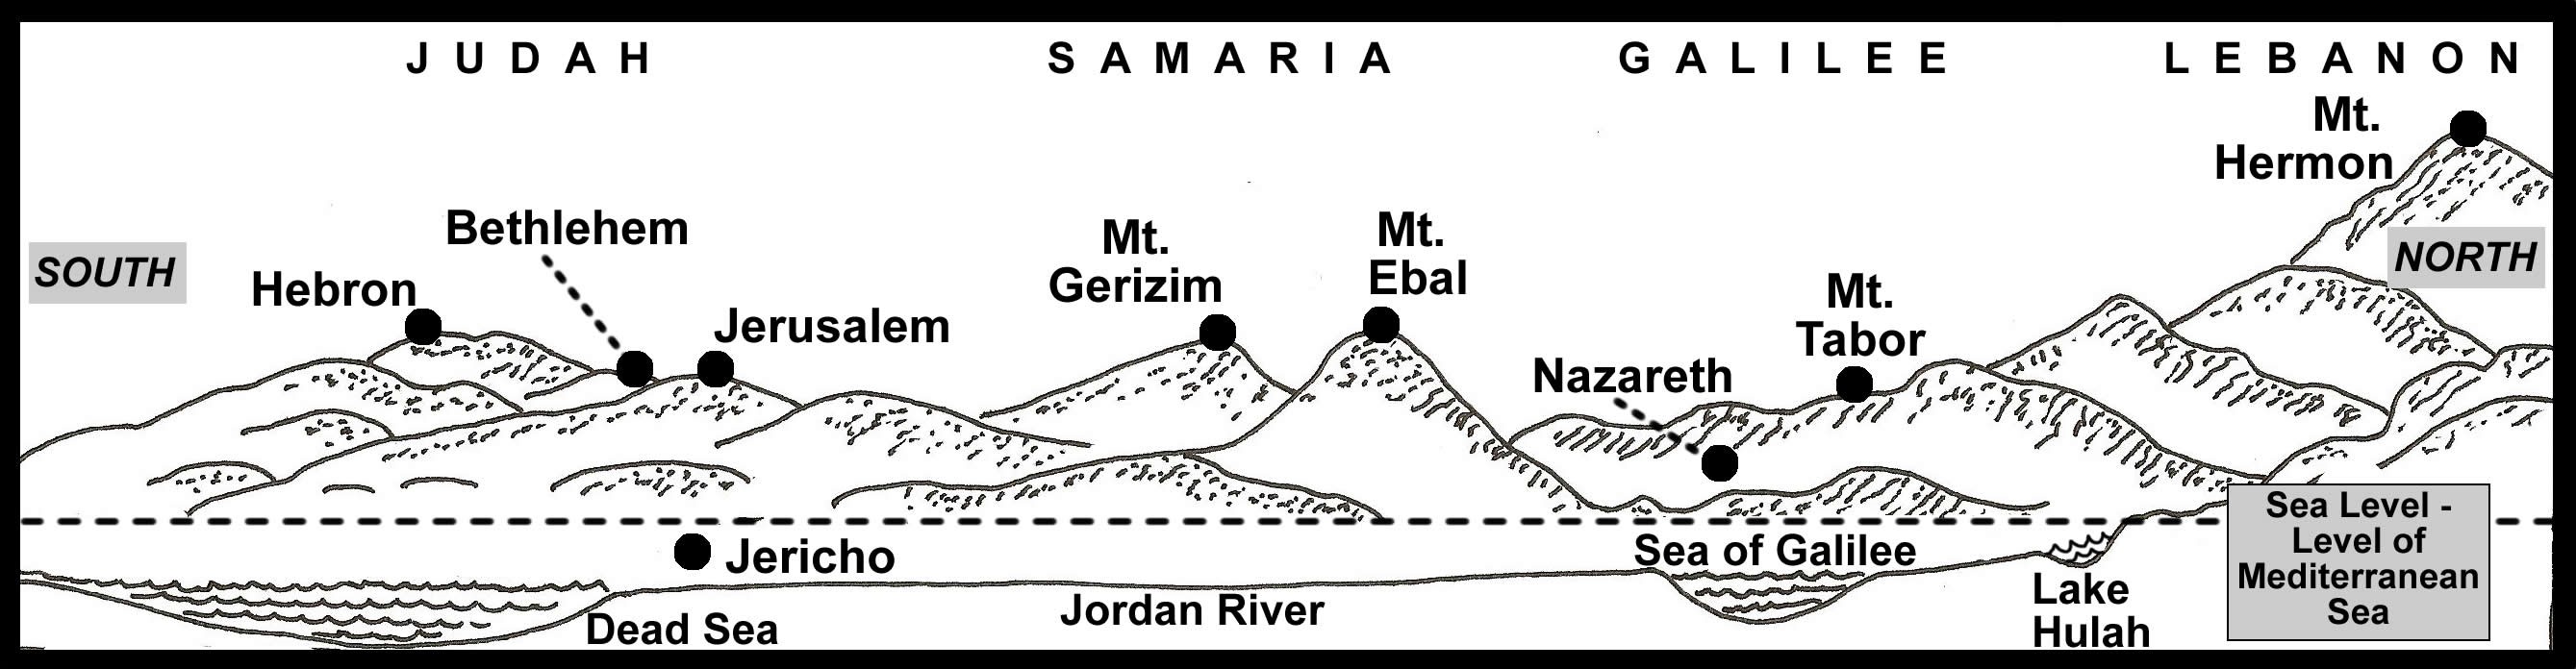 Topographical Cross-Section of Israel showing land regions and territories